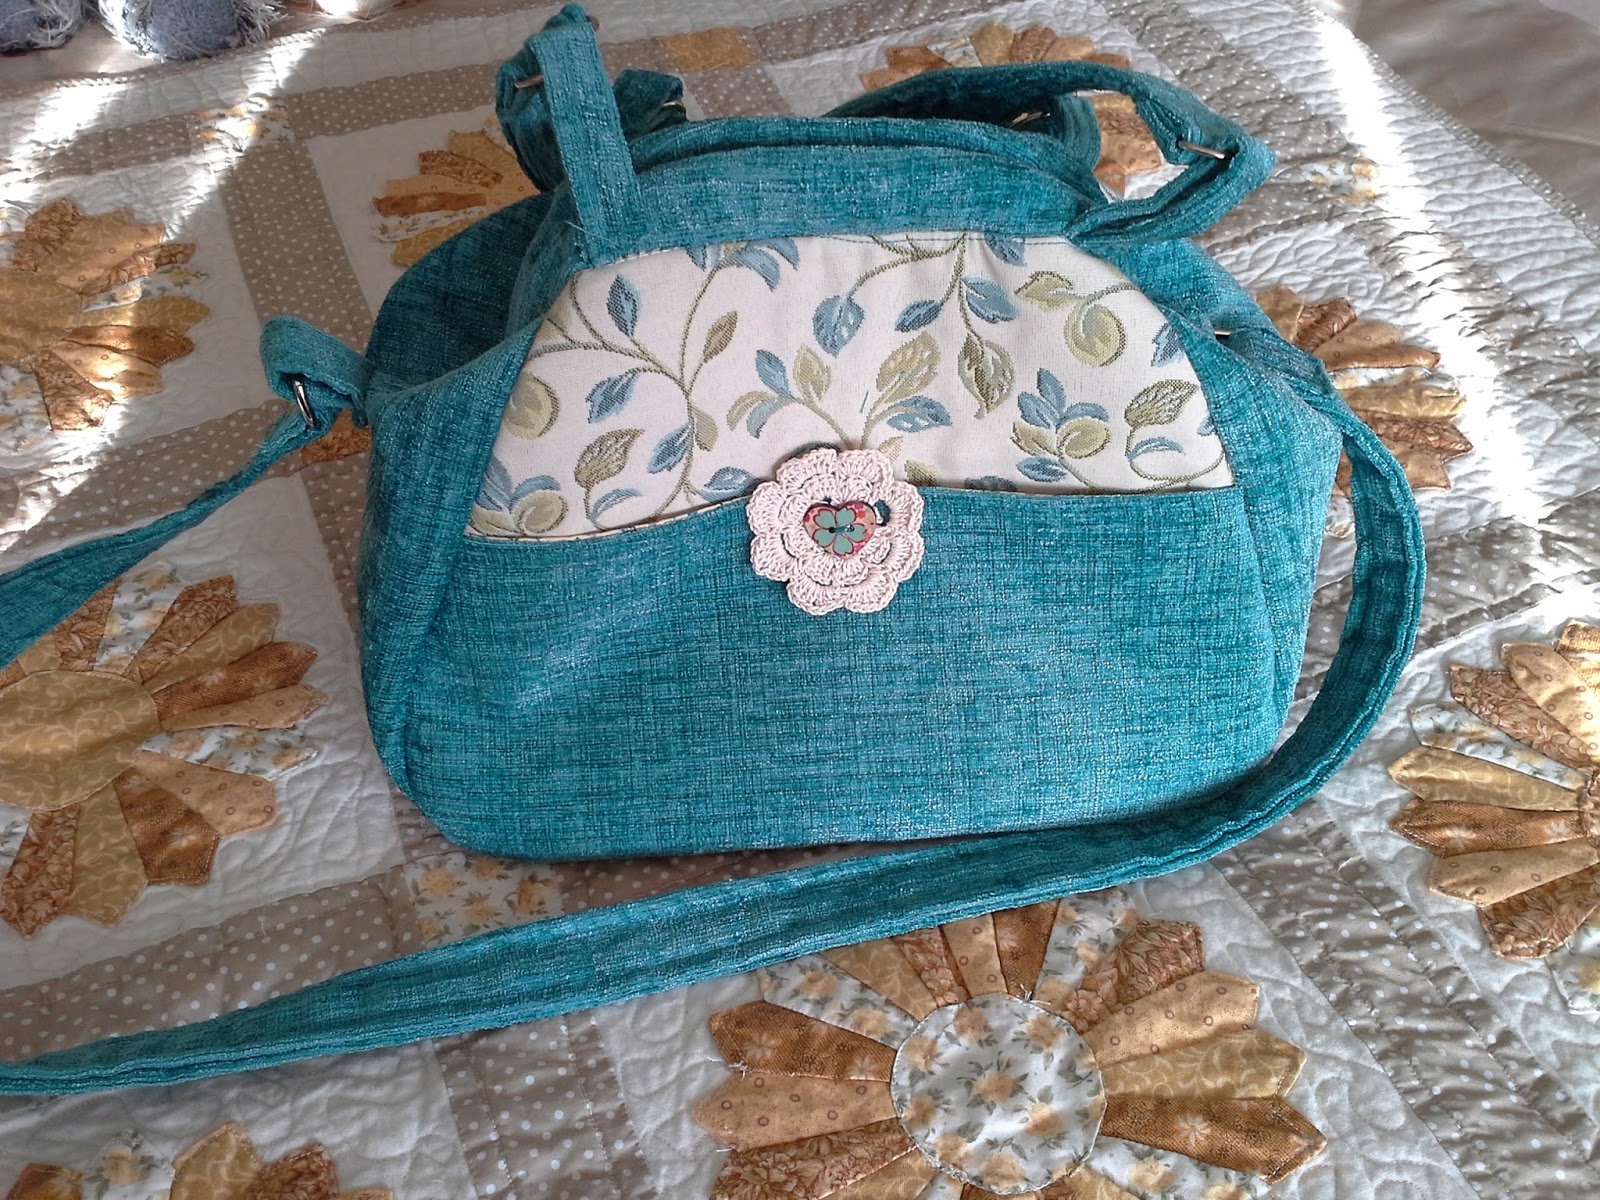 wendy`s crafting times: The Companion Bag